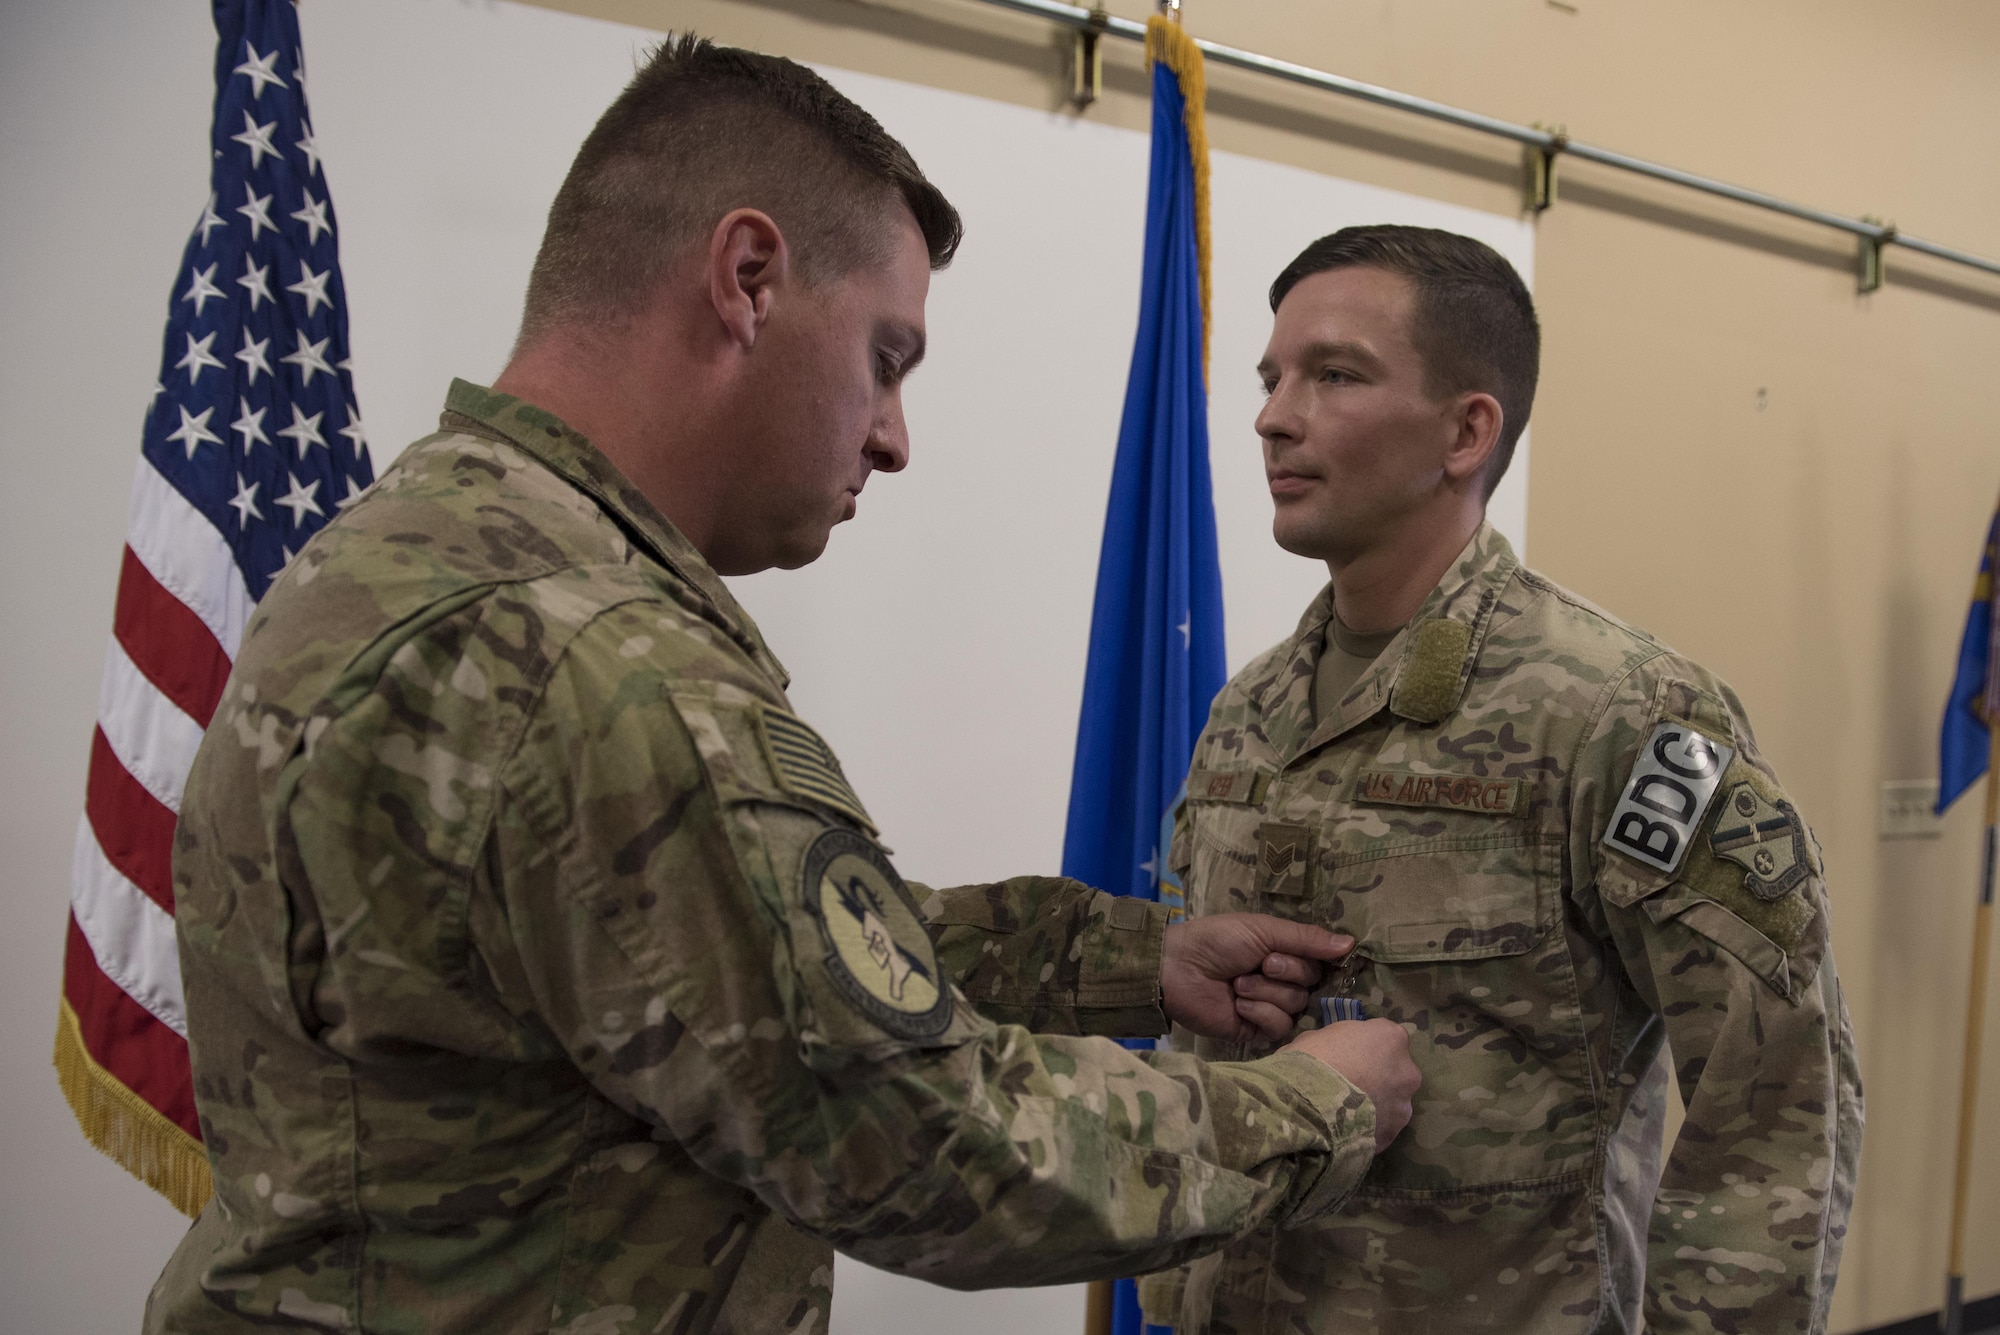 Maj. Michael Warren, 824th Base Defense Squadron commander, pins an achievement medal on Staff Sgt. David Green, 824th BDS fireteam leader, April 10, 2017, at Moody Air Force Base, Ga. Green received the medal for his act of heroism when he helped a trapped victim during an off-base vehicle incident. (U.S. Air Force photo by Airman 1st Class Lauren M. Sprunk)